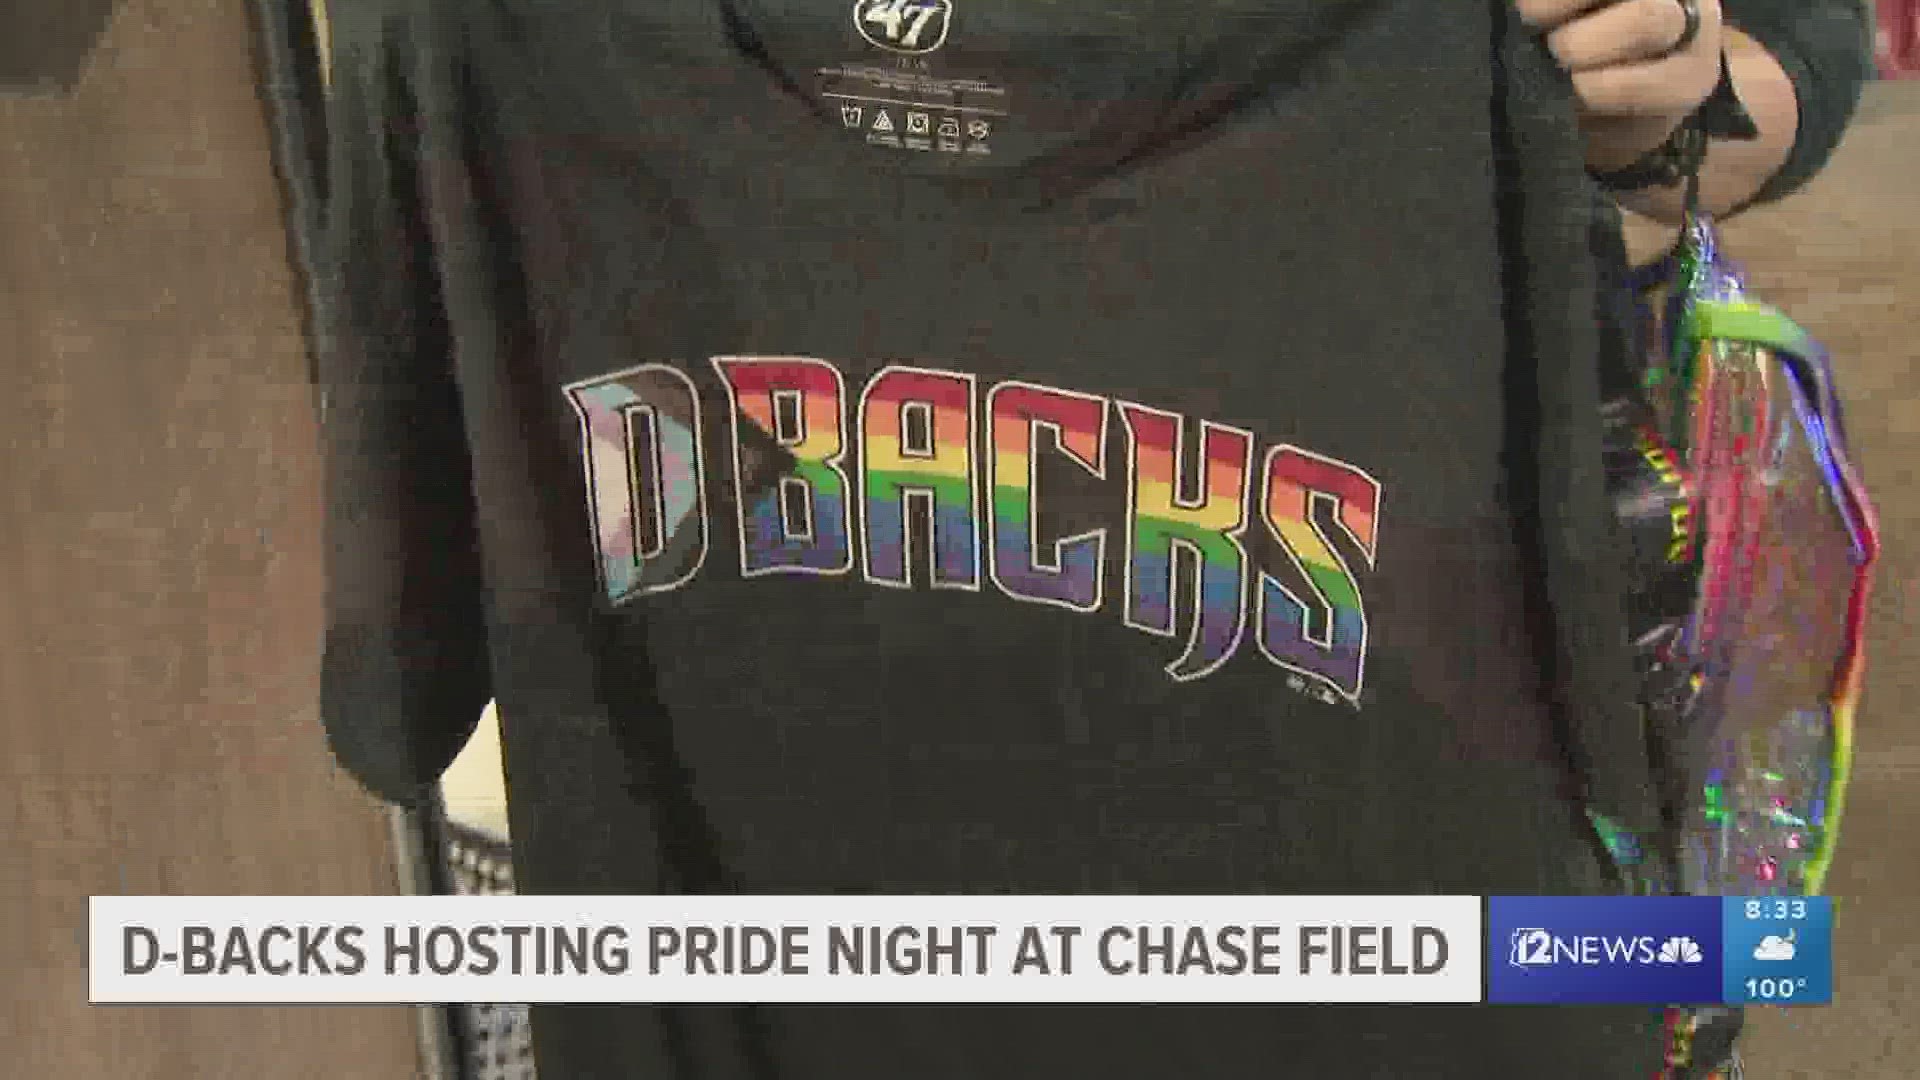 The Diamondbacks remain committed to inclusion in the workplace and at the ballpark